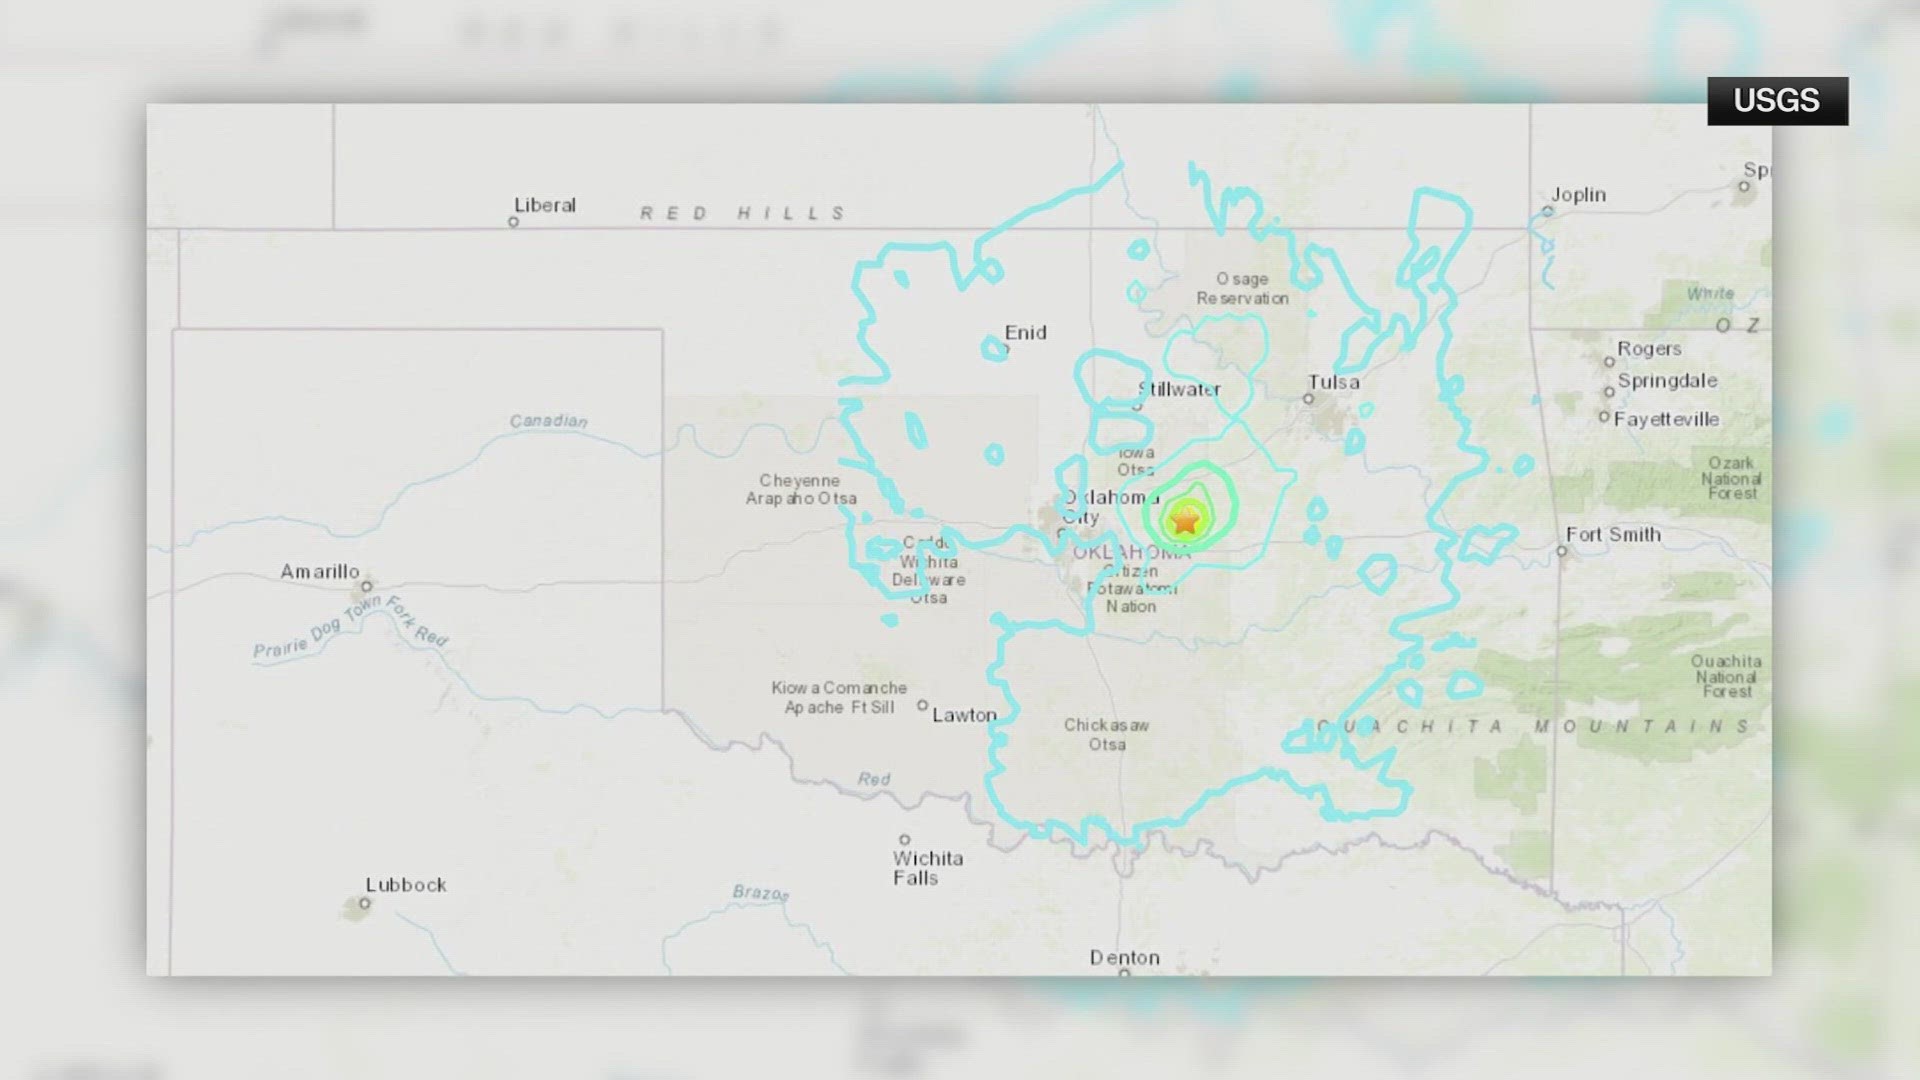 A 5.1 magnitude earthquake shook the town of Prague, Okla. In North Texas, according to the U. S. Geological Survey (USGS), some shaking was felt as well.